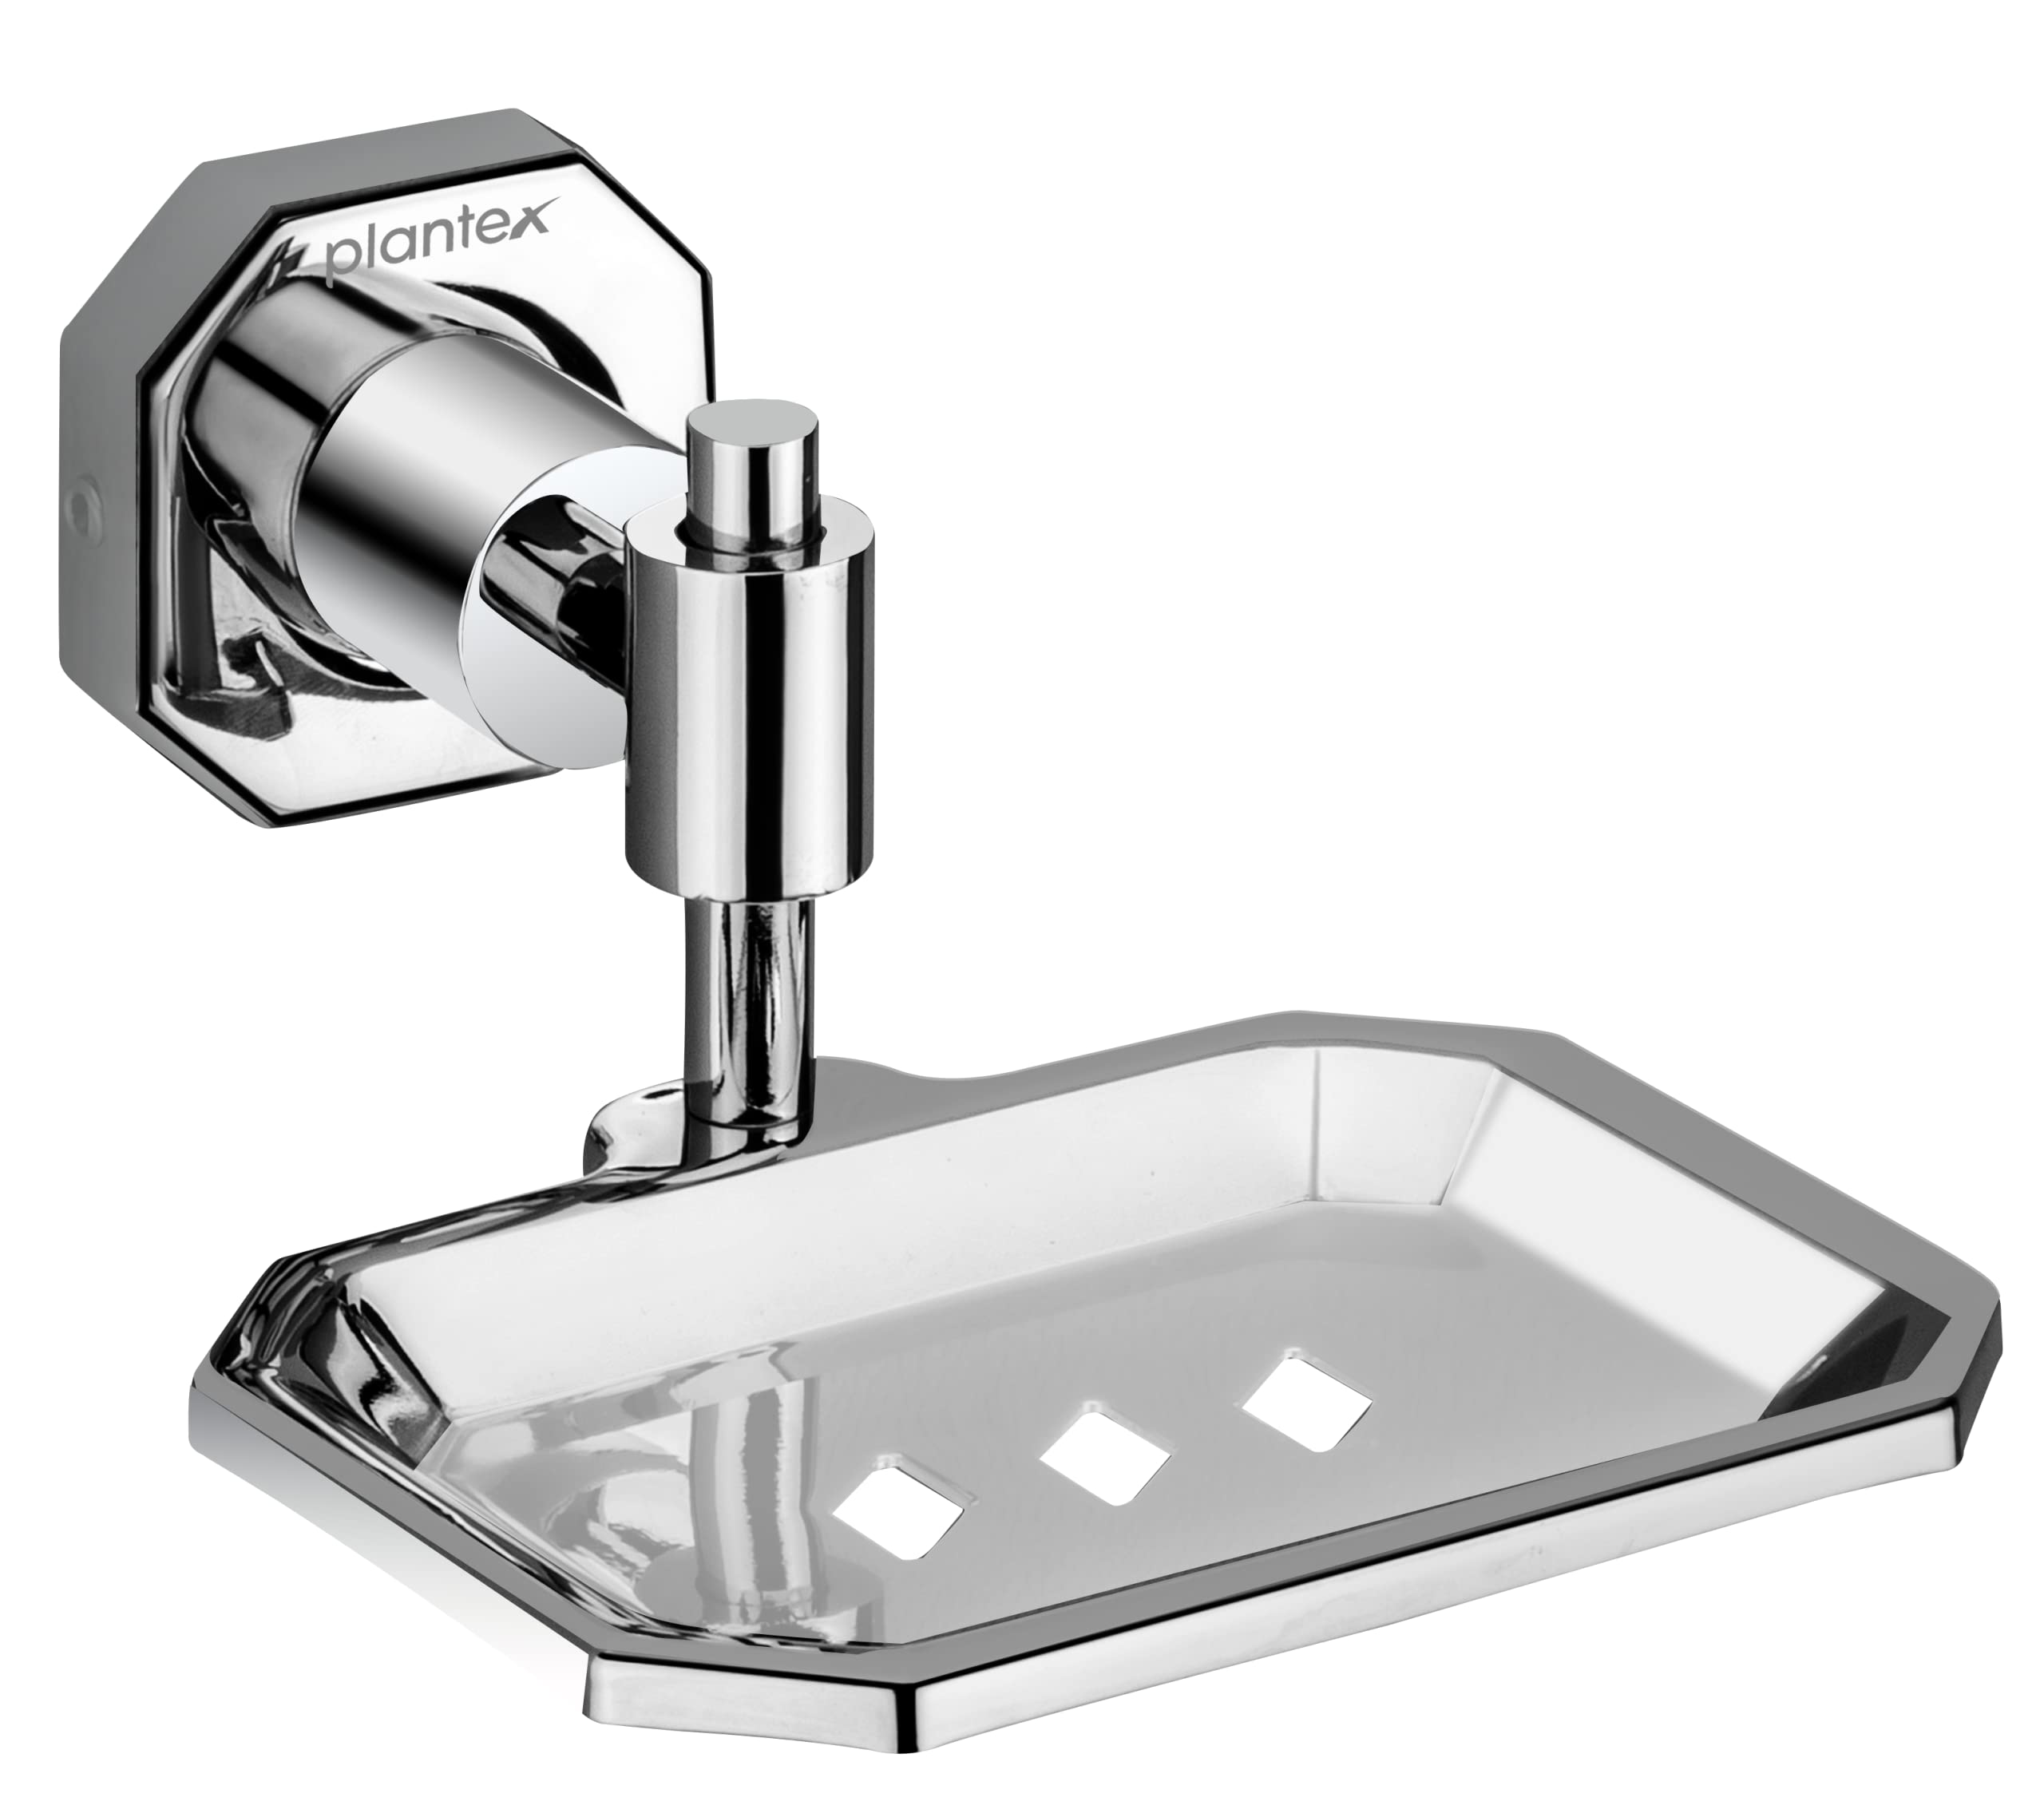 Plantex Nipron Bathroom soap case/Holder/Stand (304 Stainless Steel)